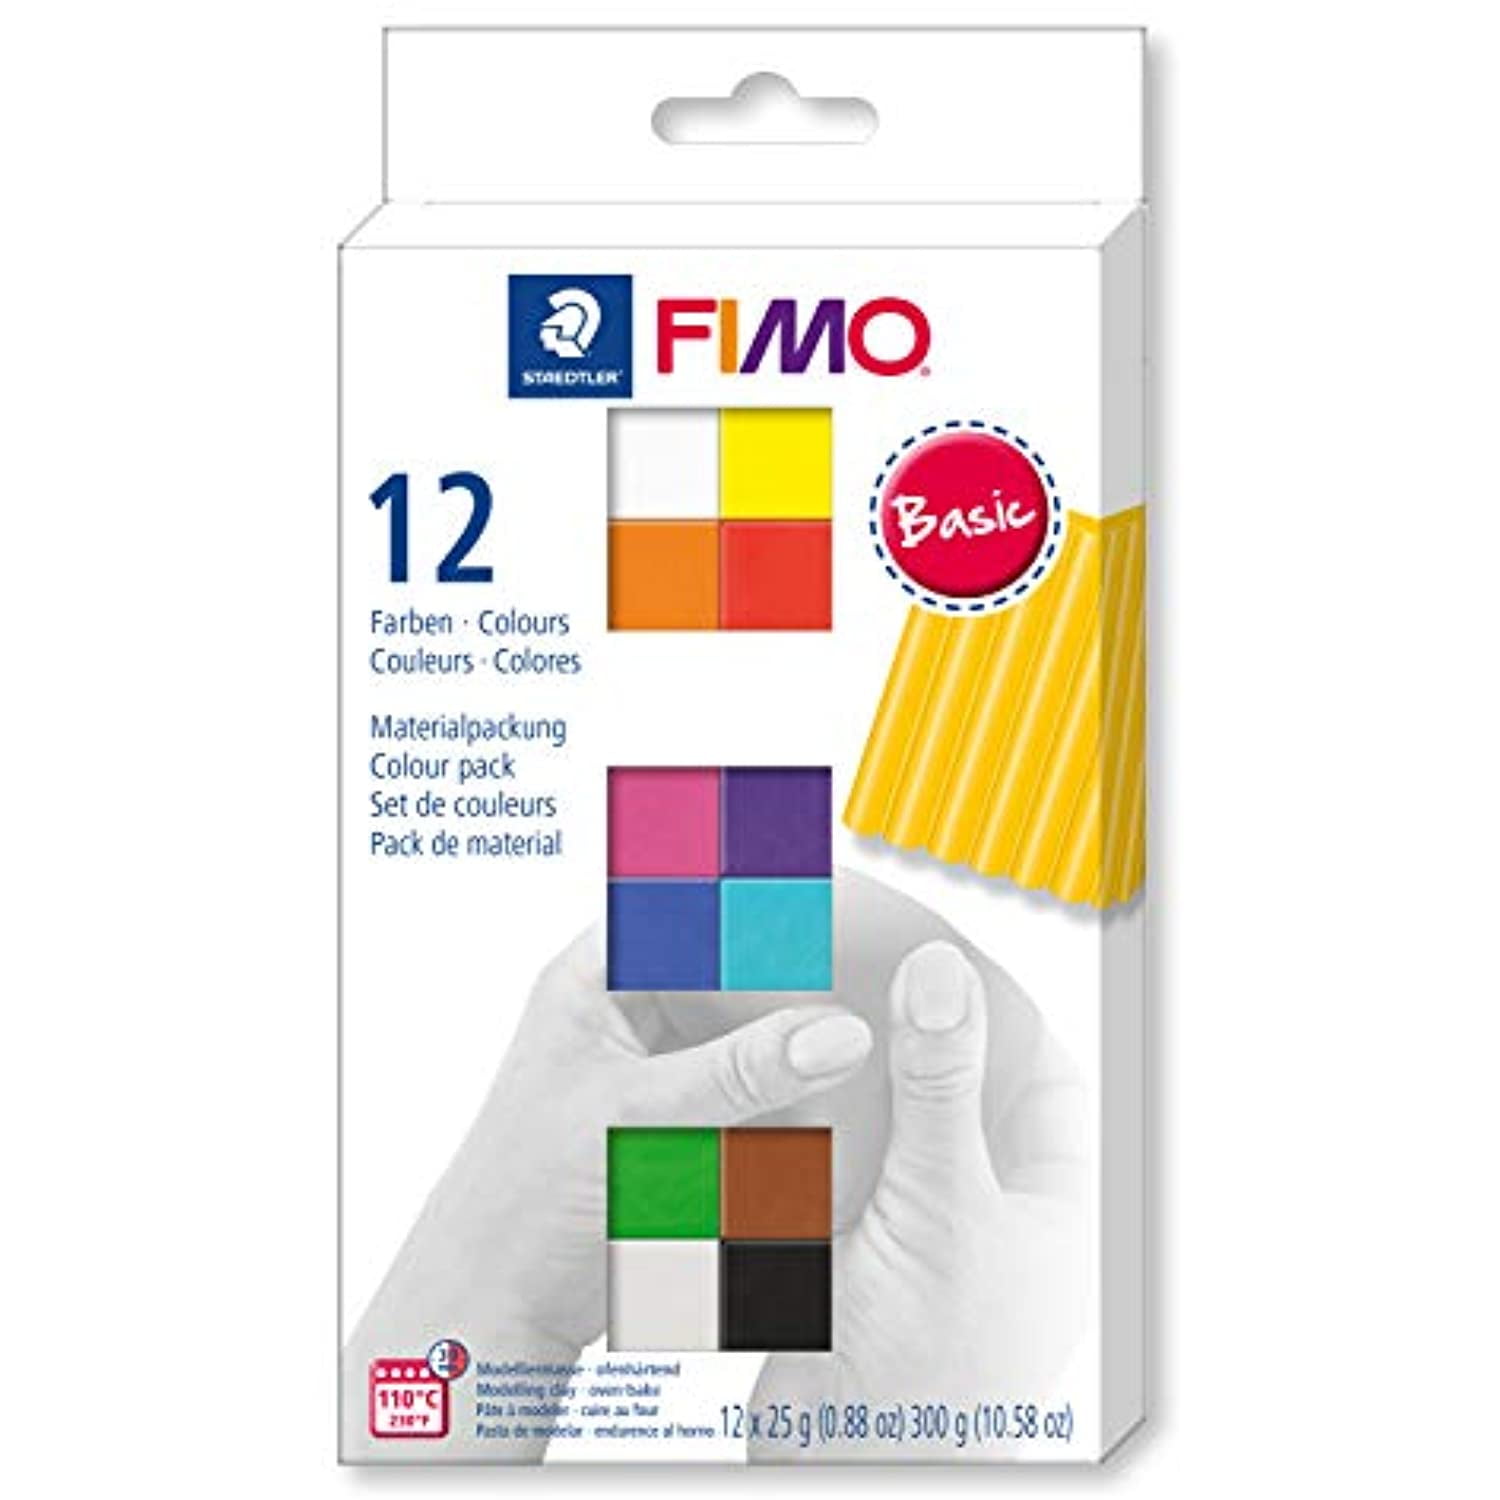 STAEDTLER 8101-0 FIMO Air Basic - Air-Drying Modelling Clay, 1 kg - White